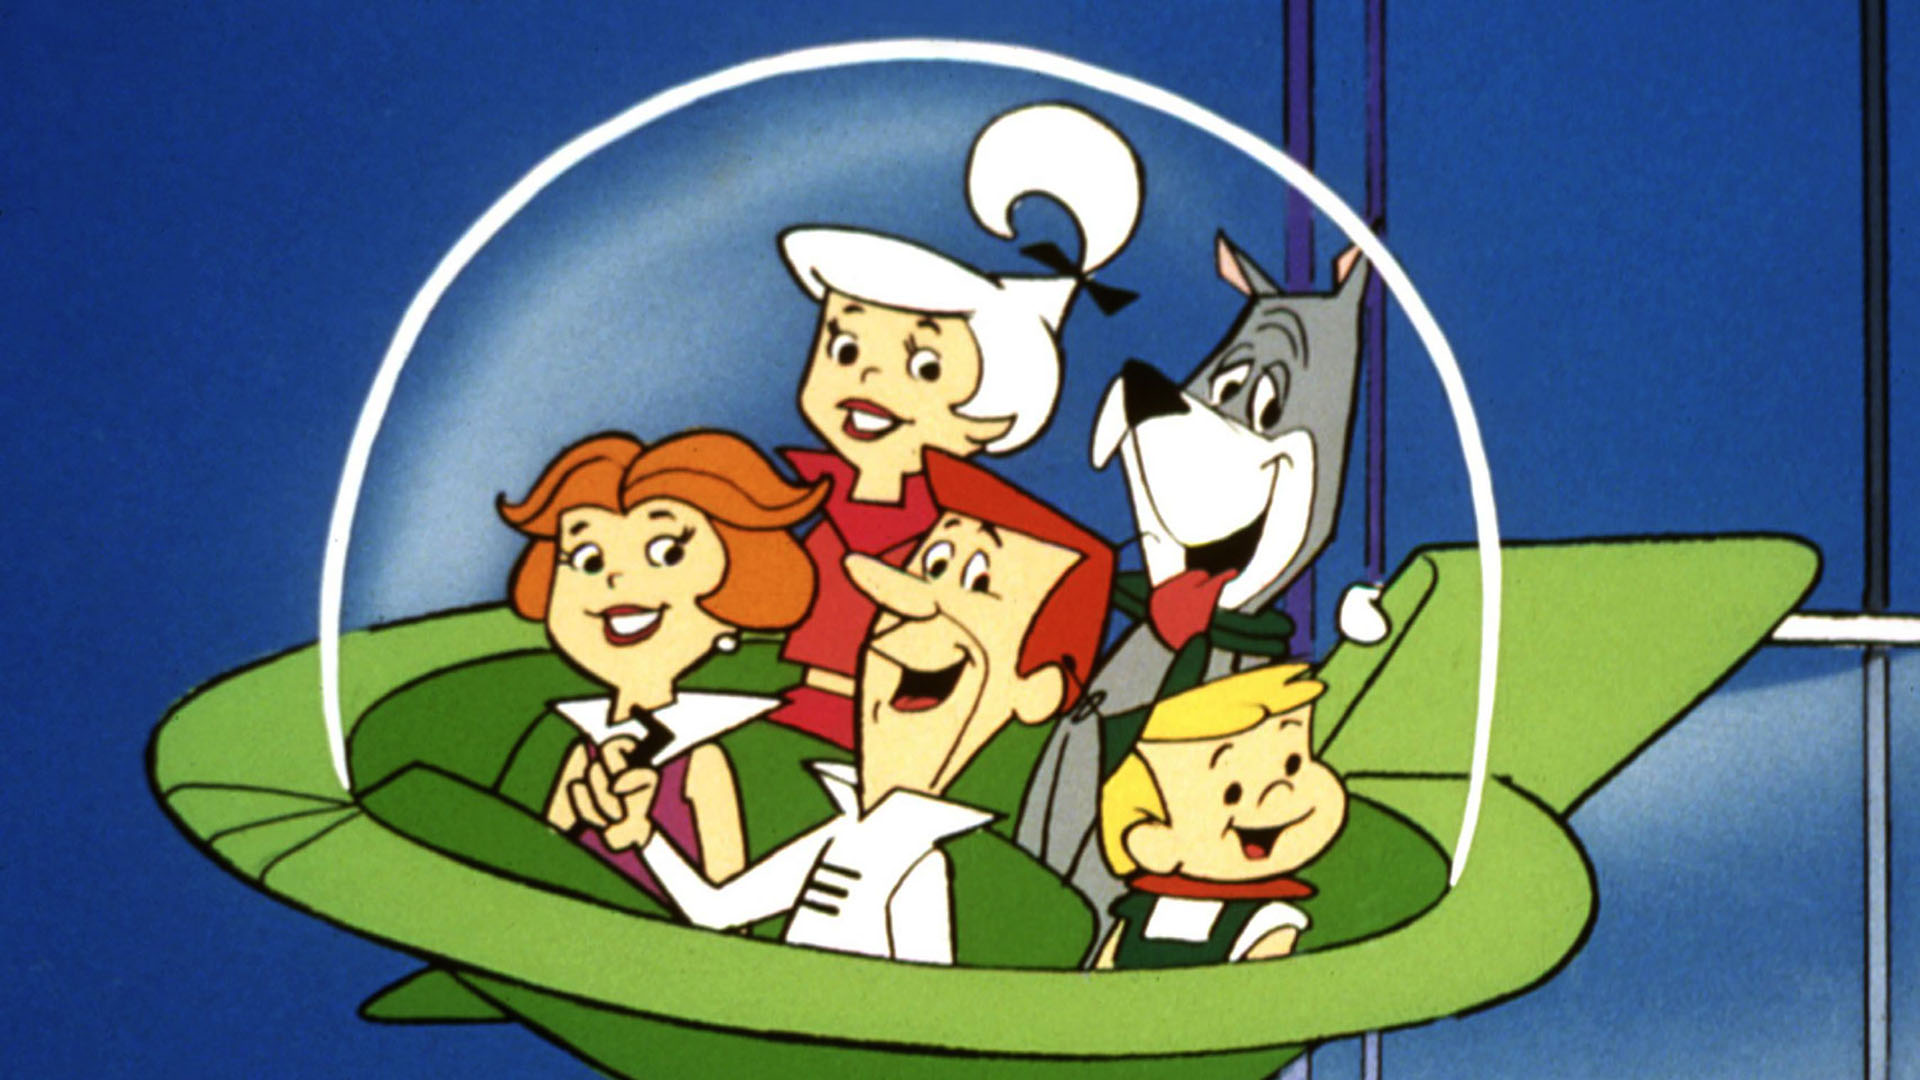 What year was The Jetsons set in?